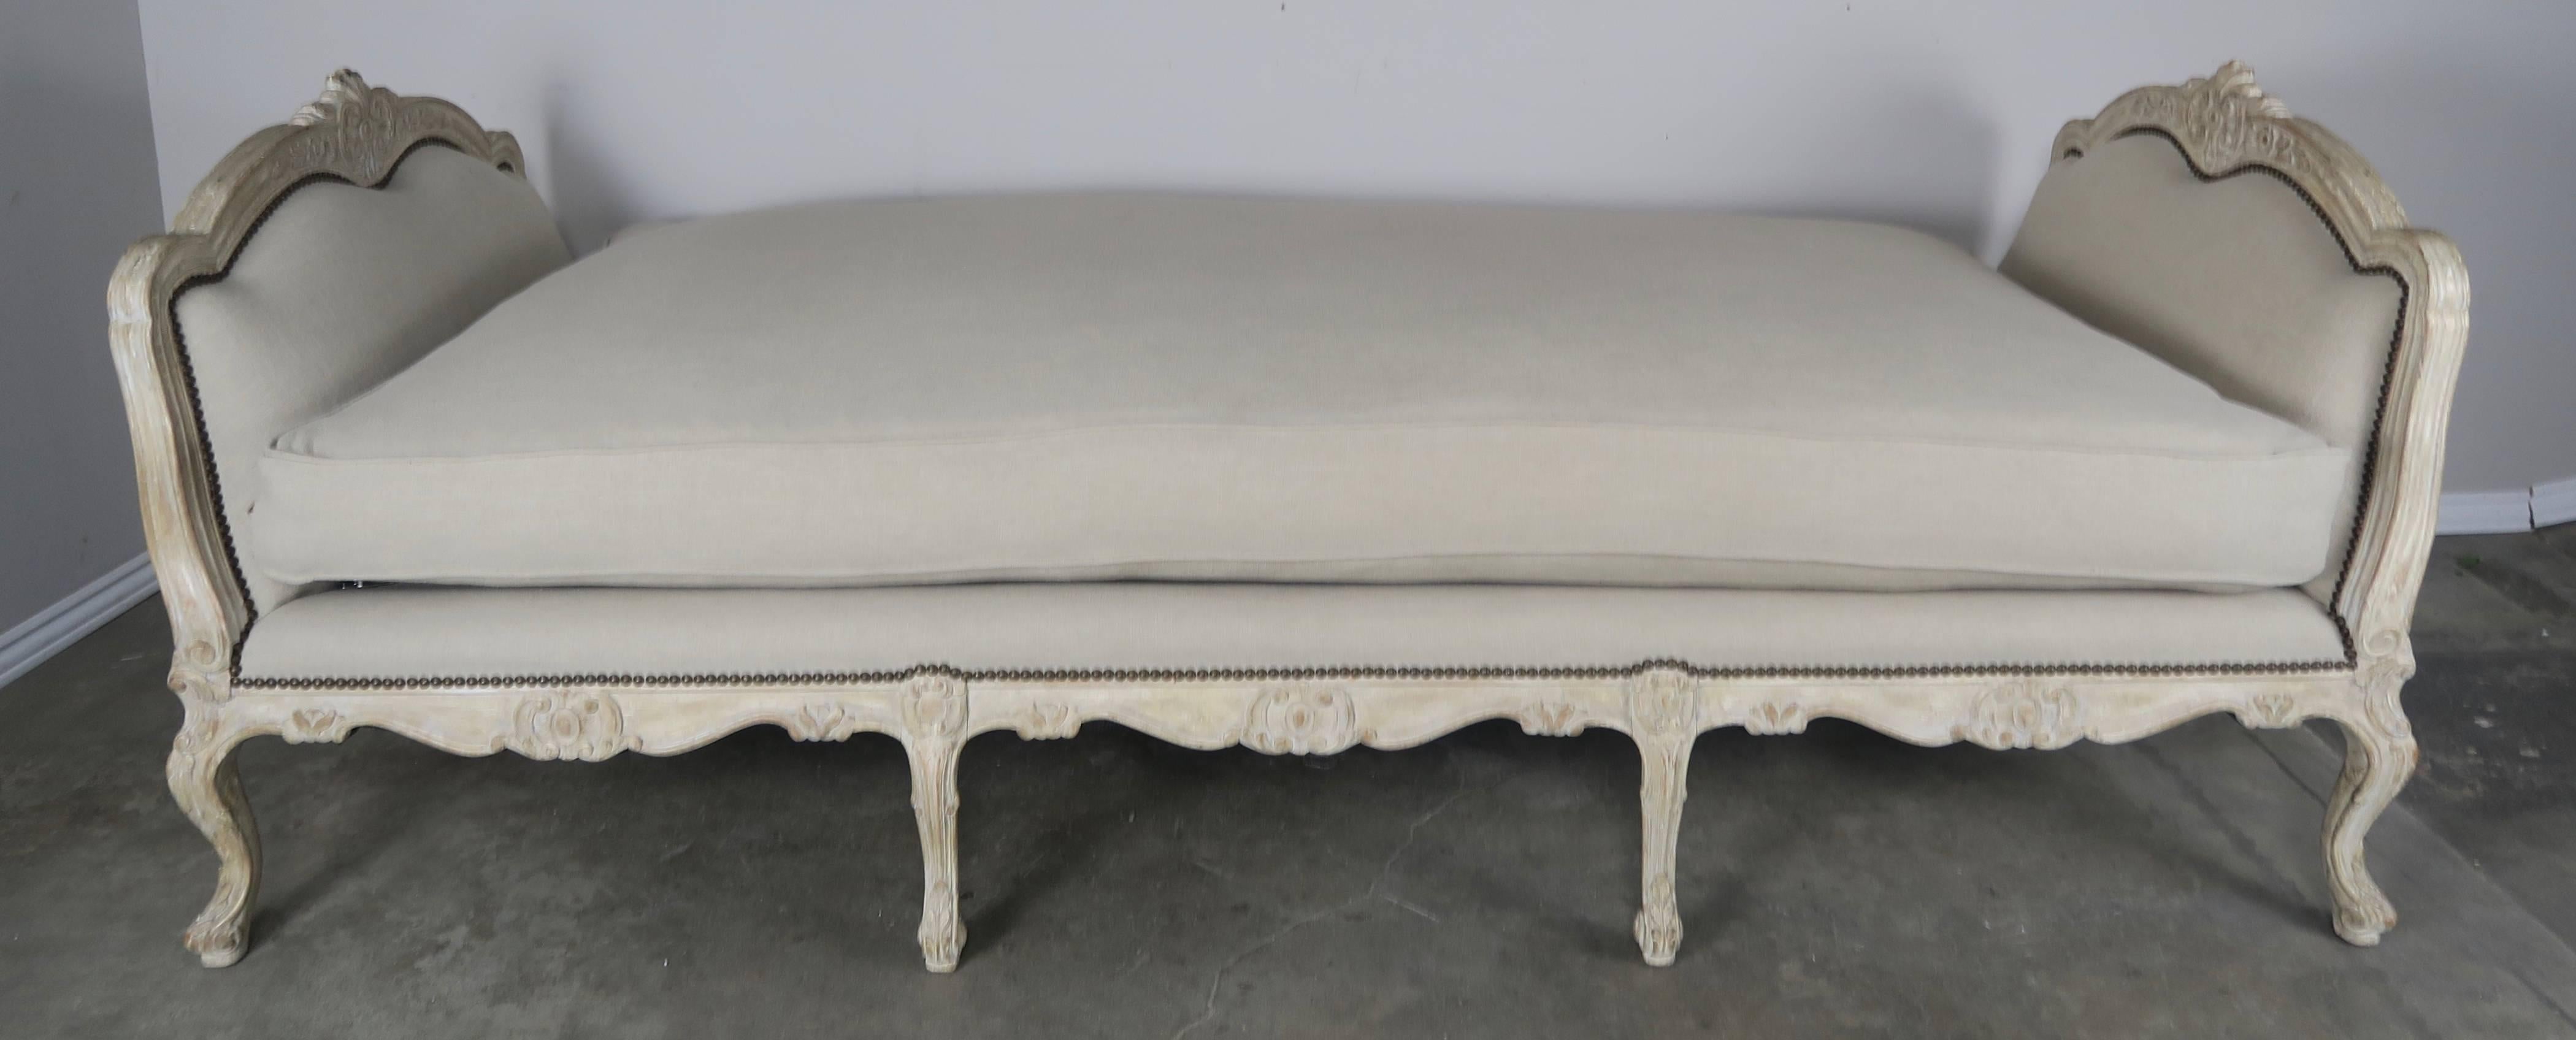 French Louis XV style carved wood daybed in a soft white wash painted finish. The daybed has been newly upholstered in a natural colored linen with antique brass colored nail heads. The daybed stands on eight caved cabriole legs. Down filled